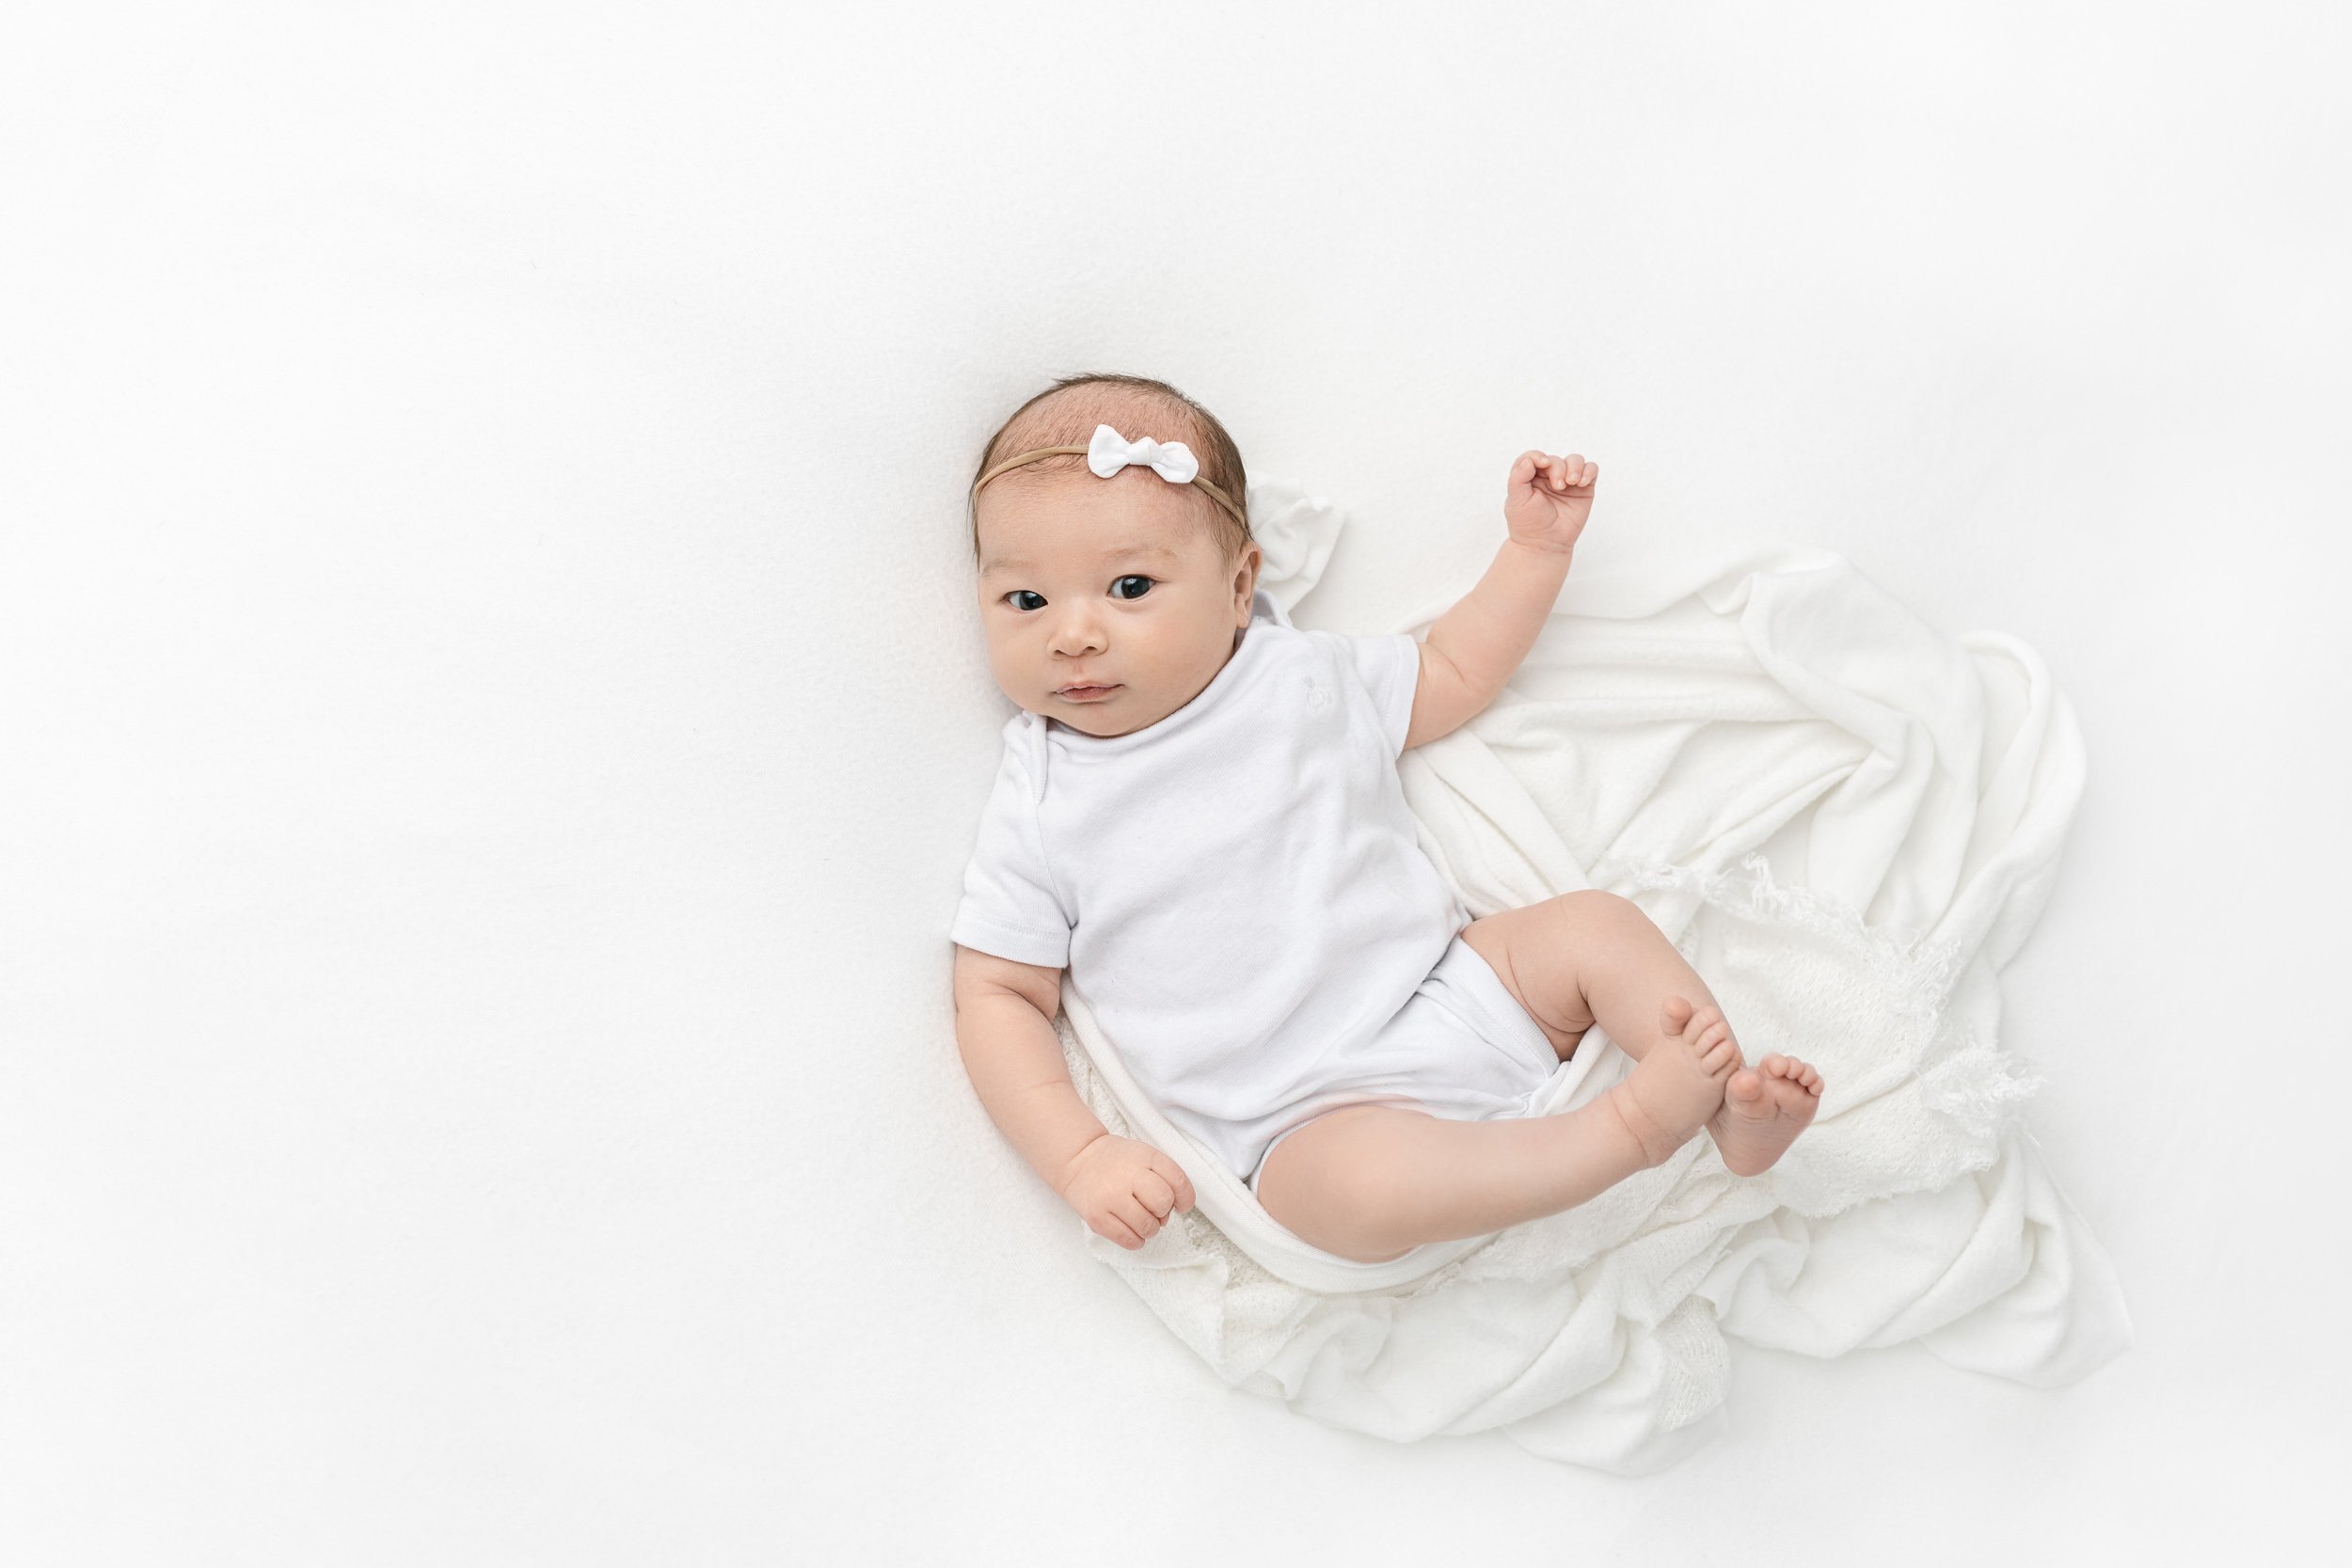  Baby girl in a white onesie at a studio captured by Nicole Hawkins PHotography a newborn photographer. Maplewood photographers baby girl #NicoleHawkinsPhotography #studionewbornportraits #NJstudiophotographer #NJnewborns #NicoleHawkinsNewborns 